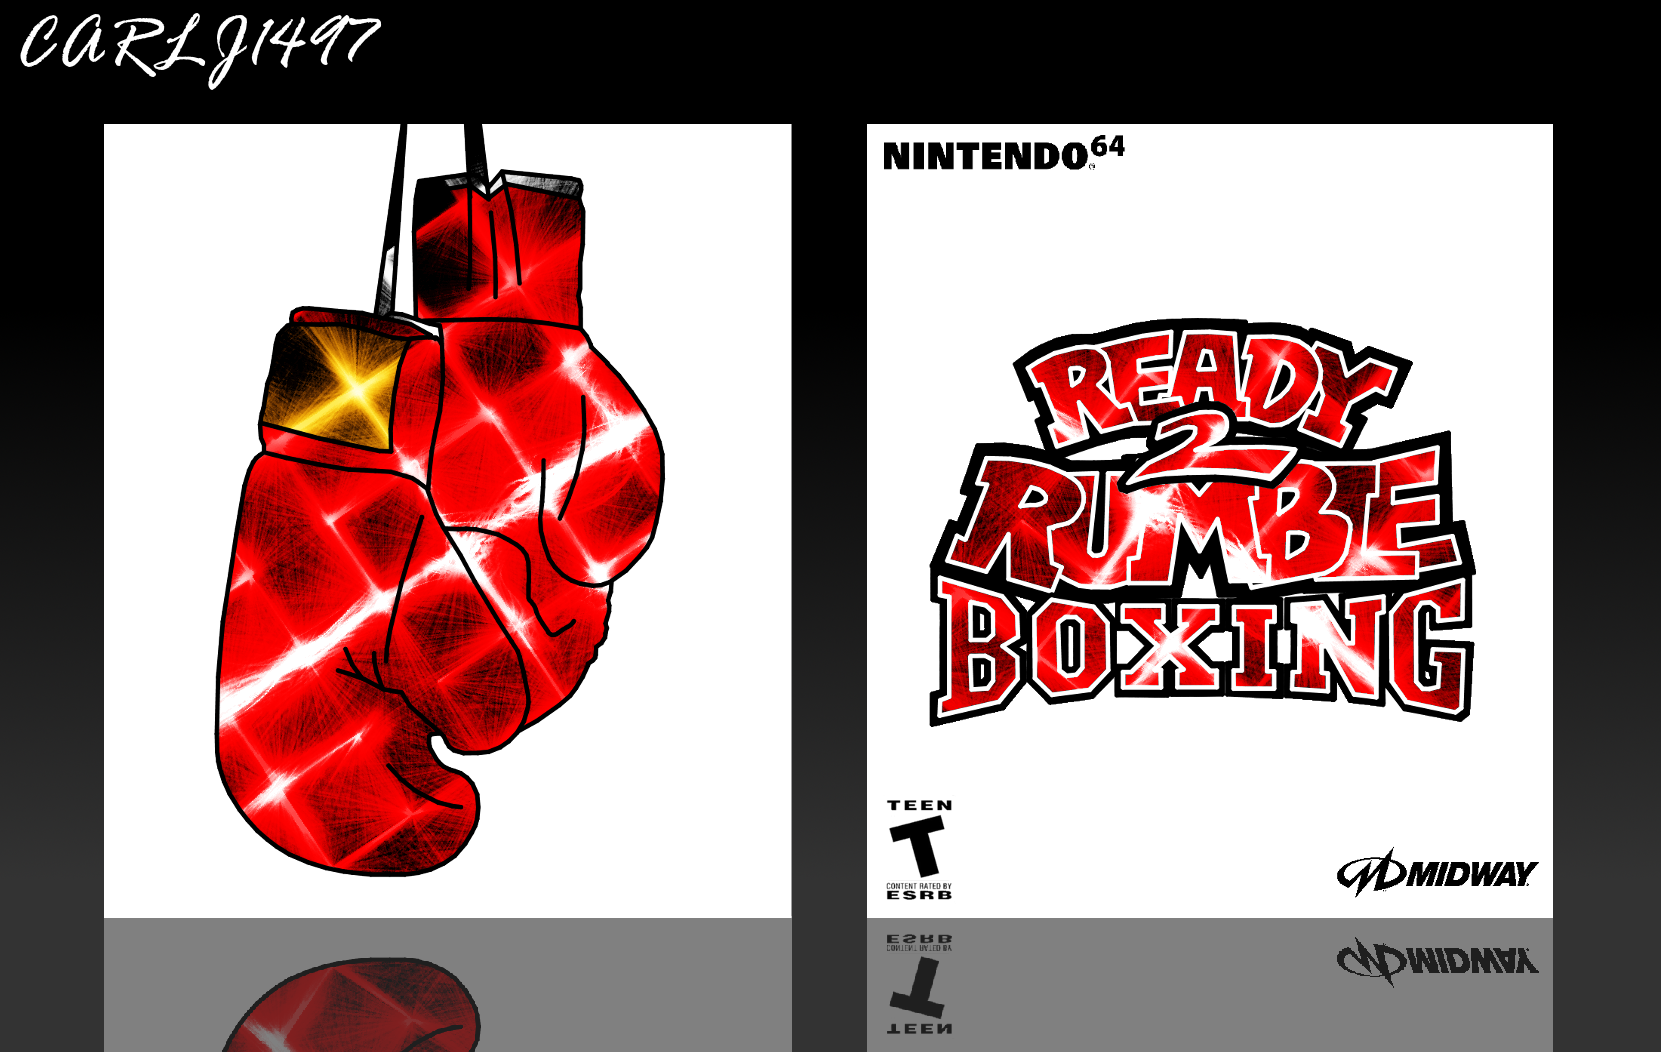 Ready 2 Rumble Boxing box cover